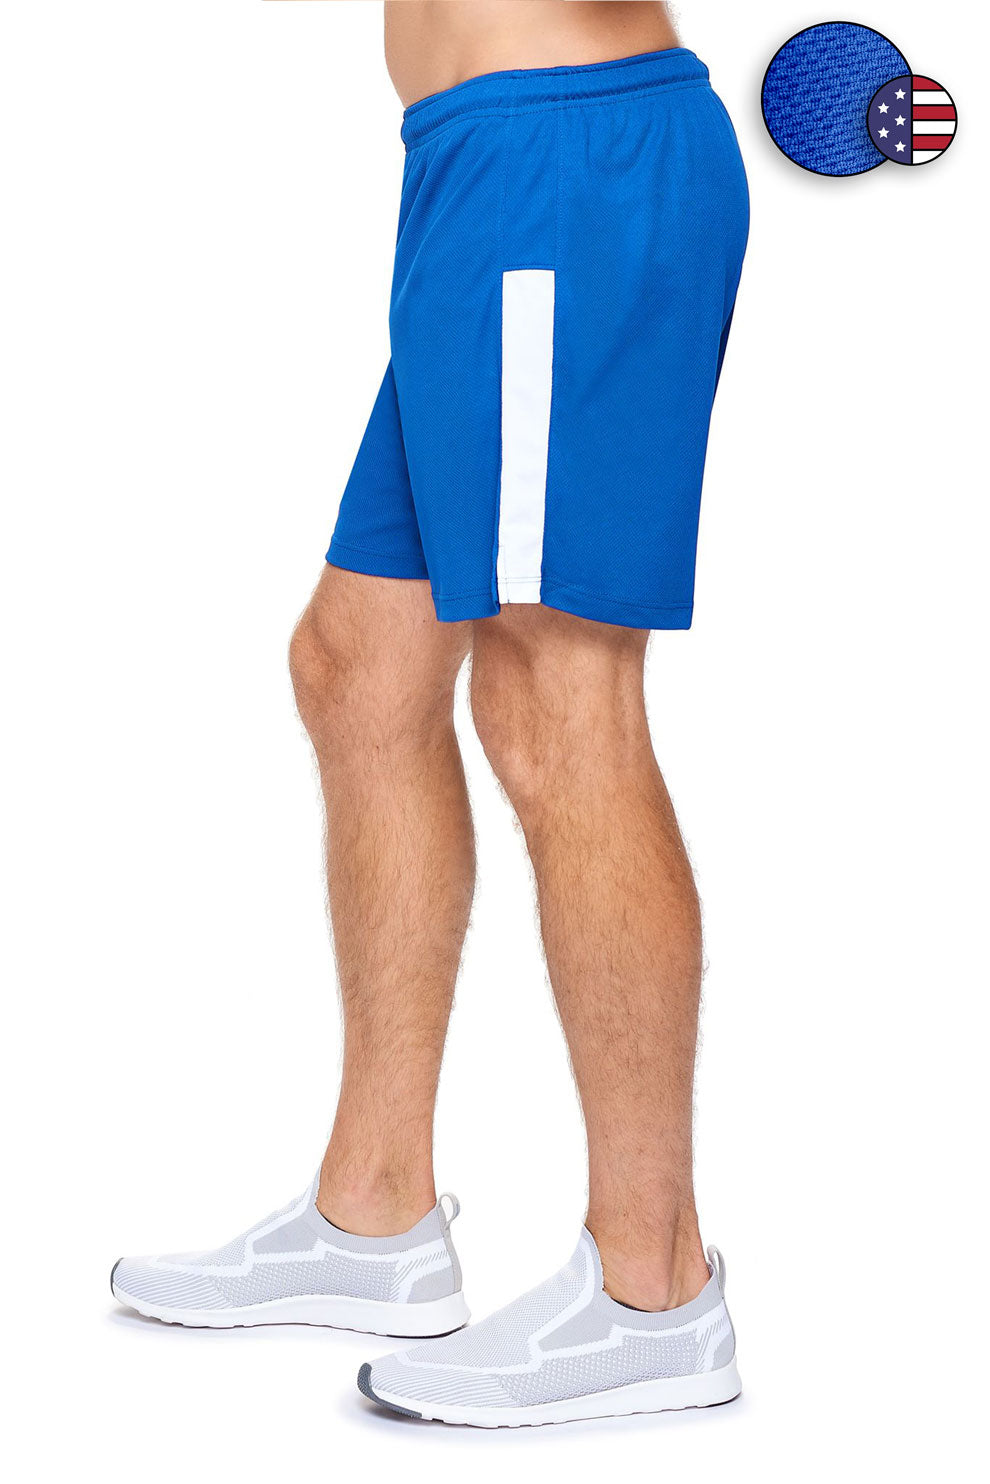 Expert Brand Wholesale Men's Oxymesh Performance Shorts Made in USA Royal Blue#royal-blue